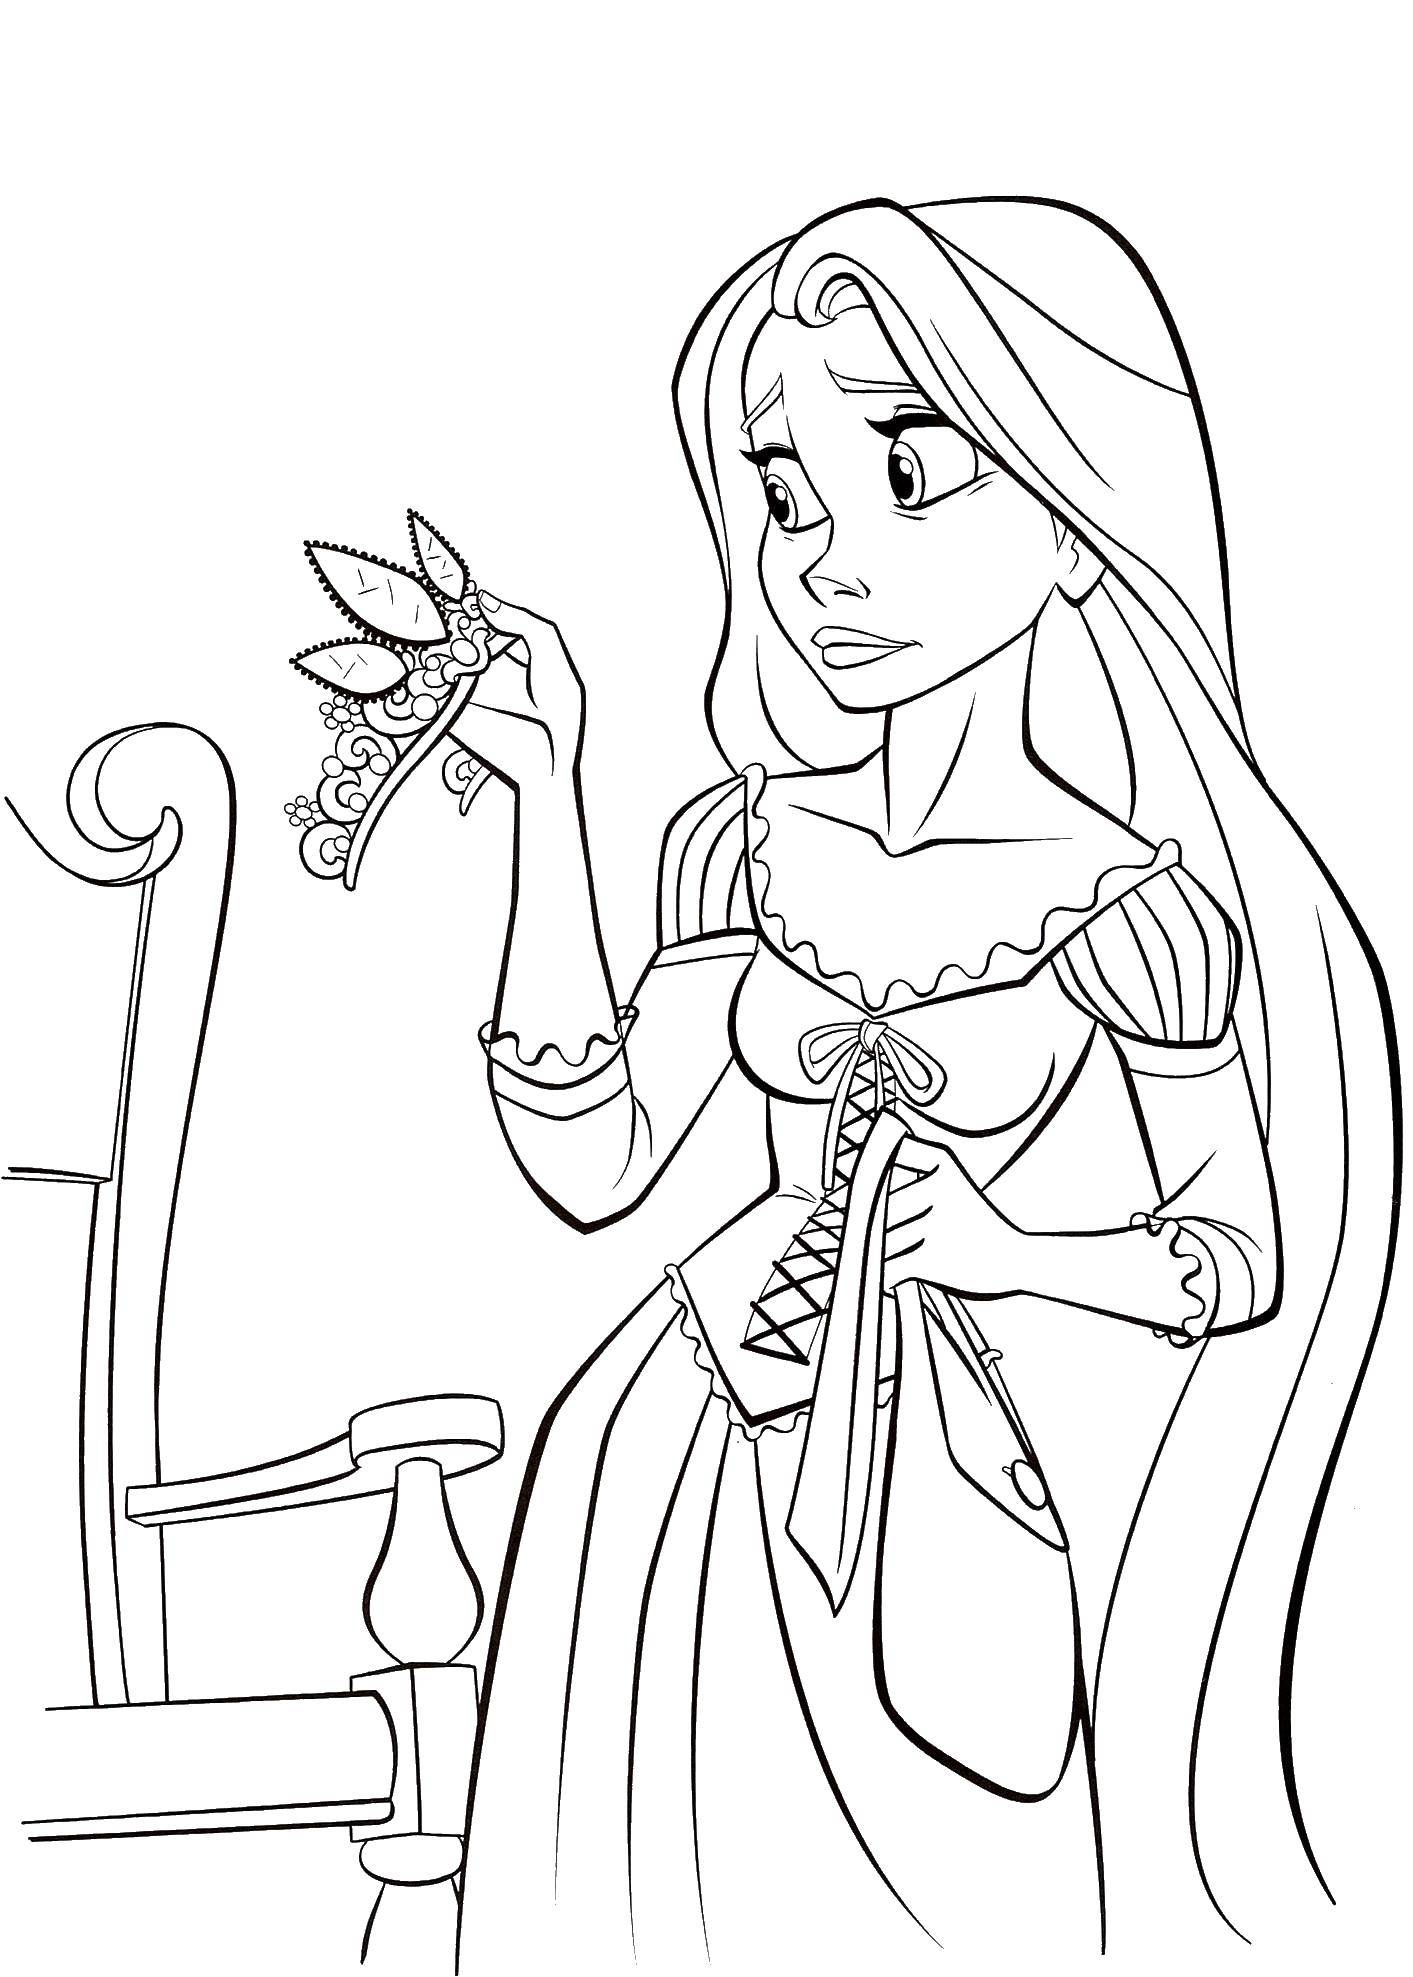 Coloring Rapunzel looks at the tiara. Category Disney coloring pages. Tags:  Disney, Rapunzel.